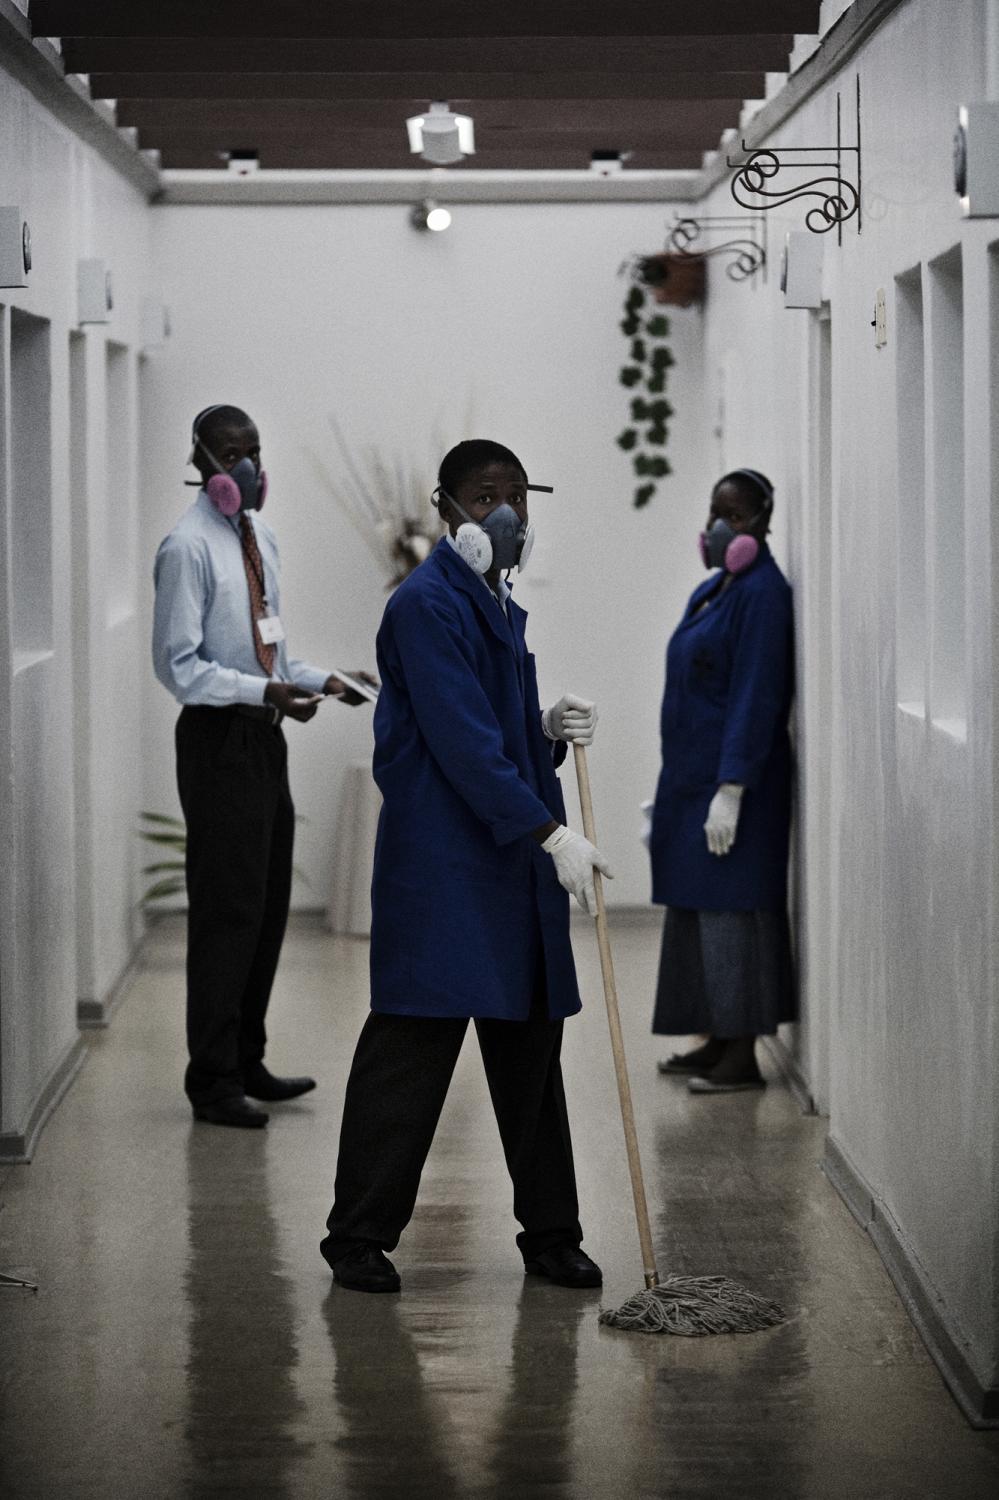 Tuberculosis / Lesotho - Lesotho.
Cleaners at the Maseru clinic, they need to...